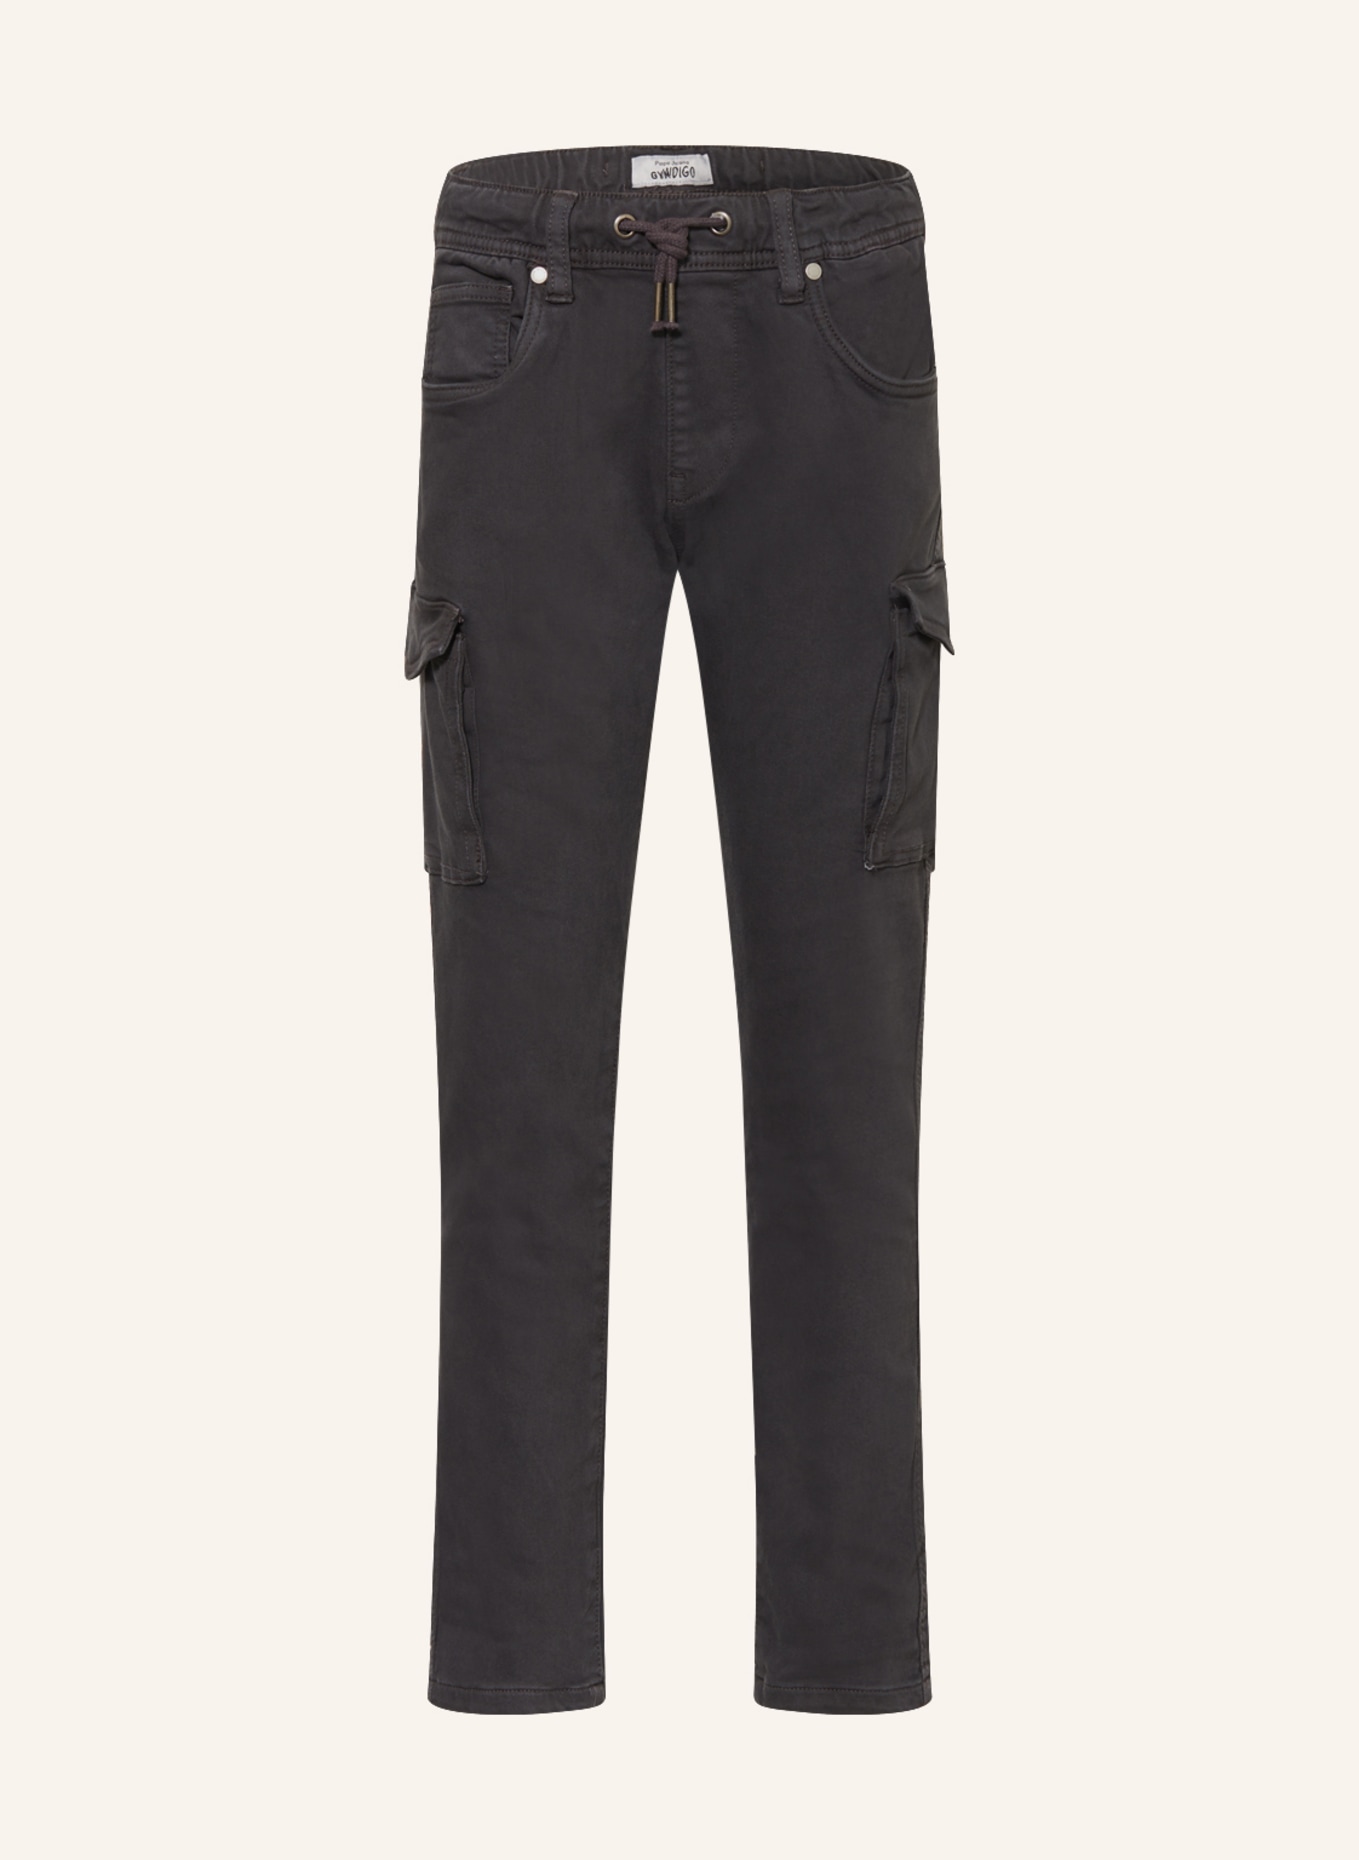 Pepe Jeans Cargohose CHASE schwarz CHARGO in